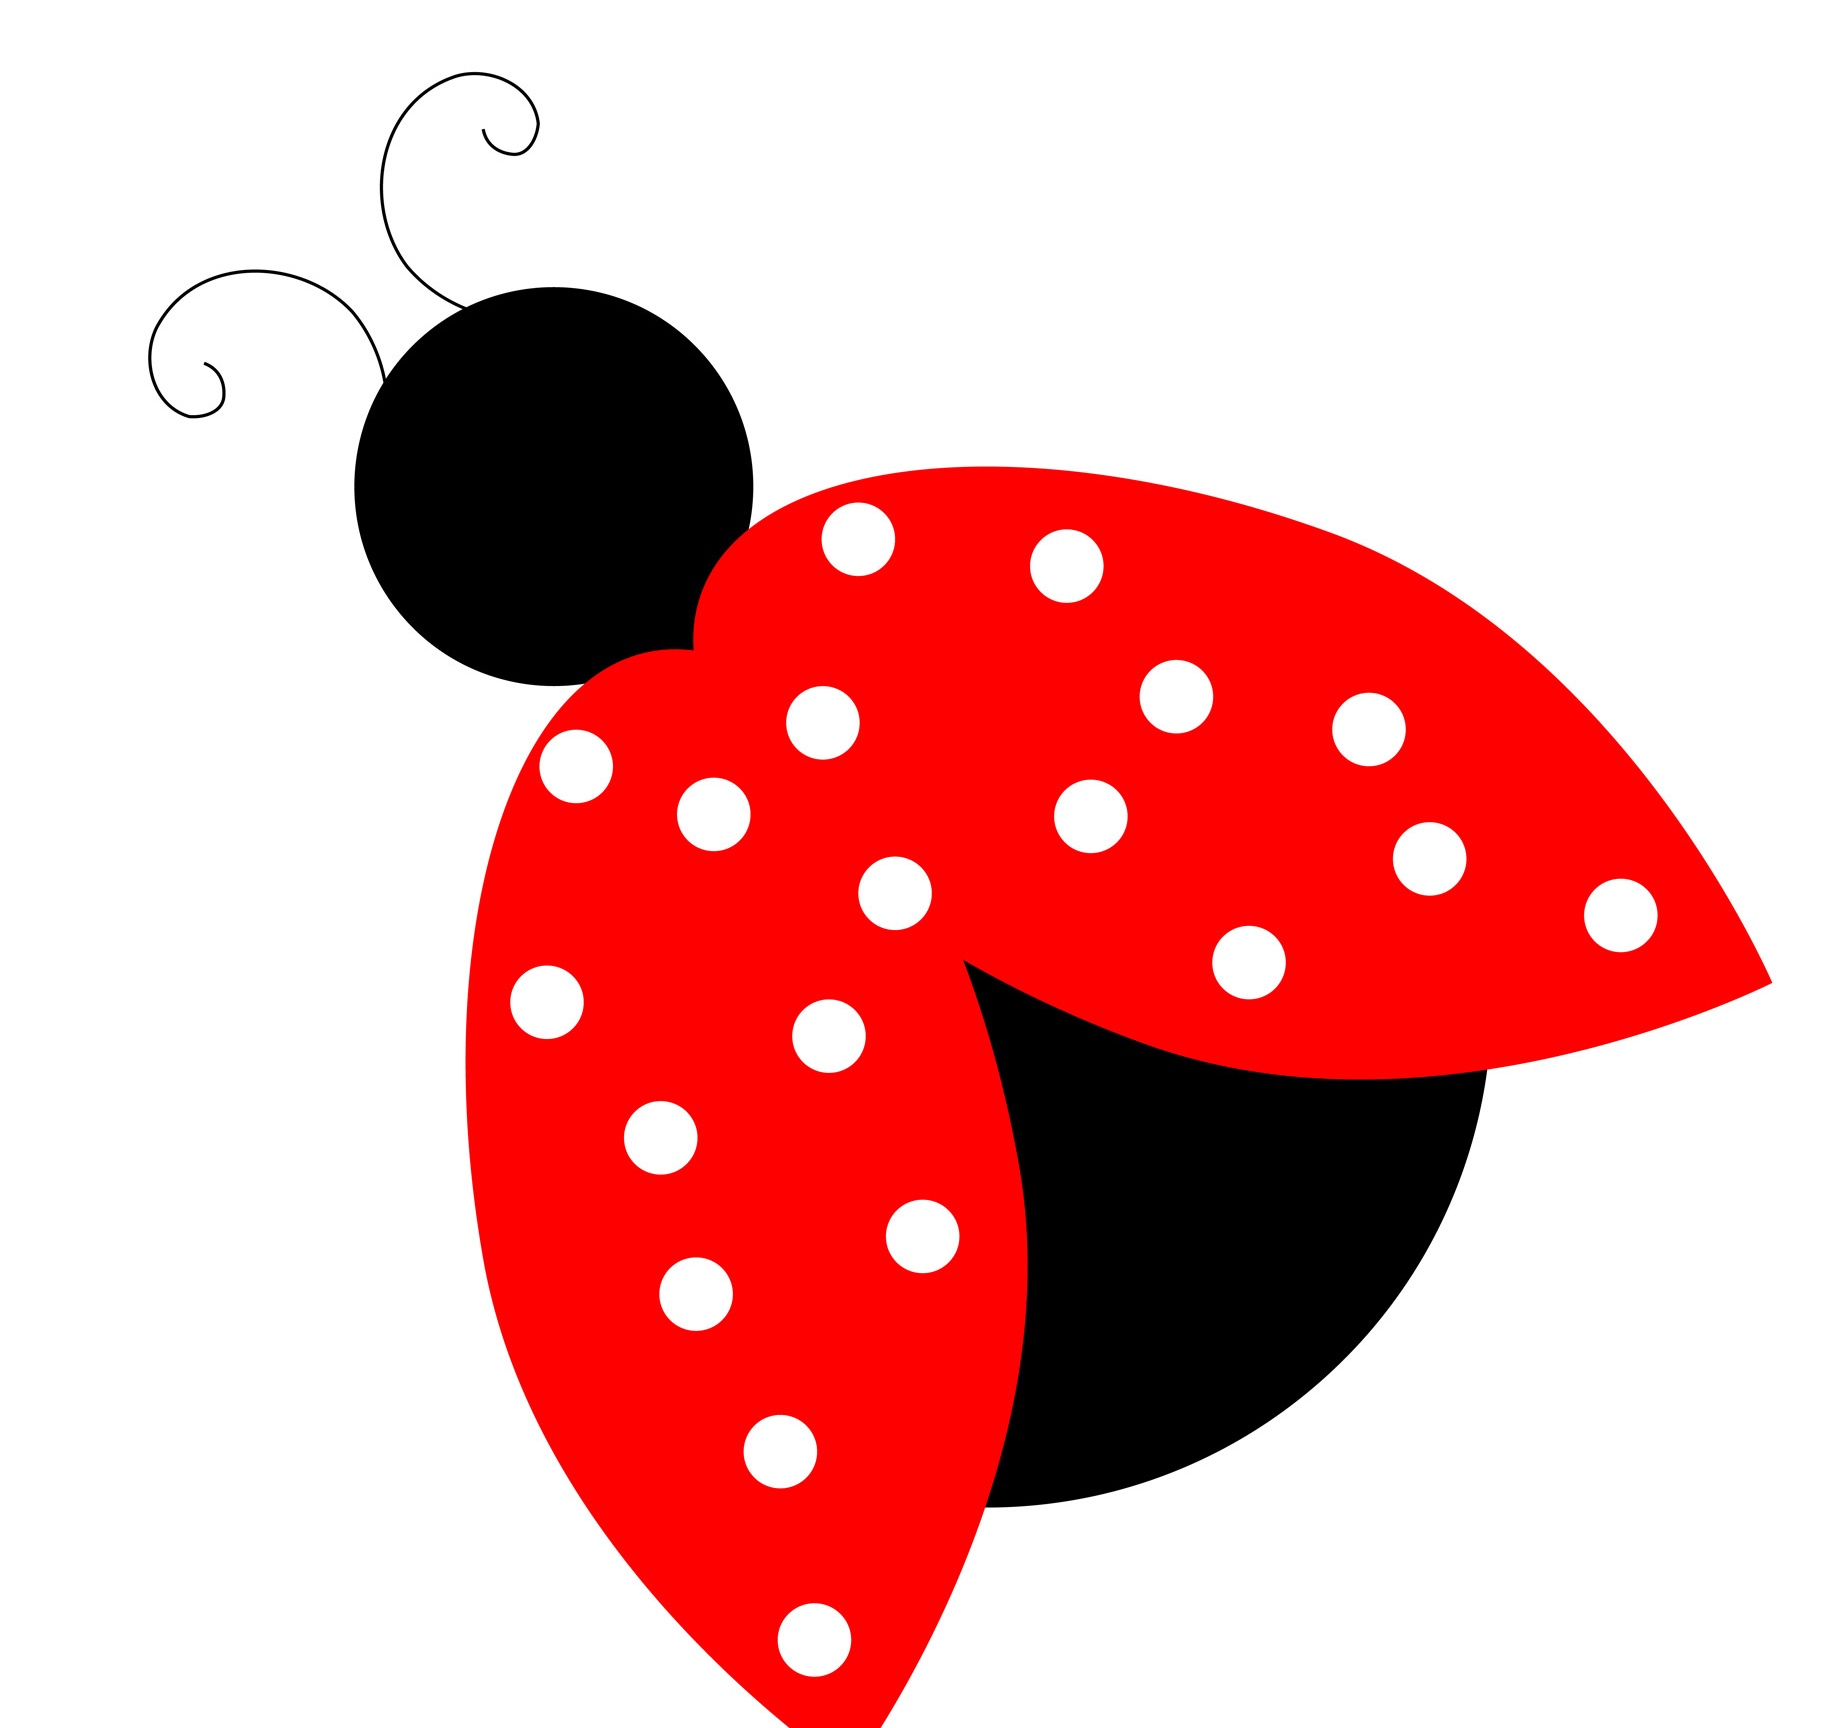 Ladybug lady bug pictures on animal picture society cliparts